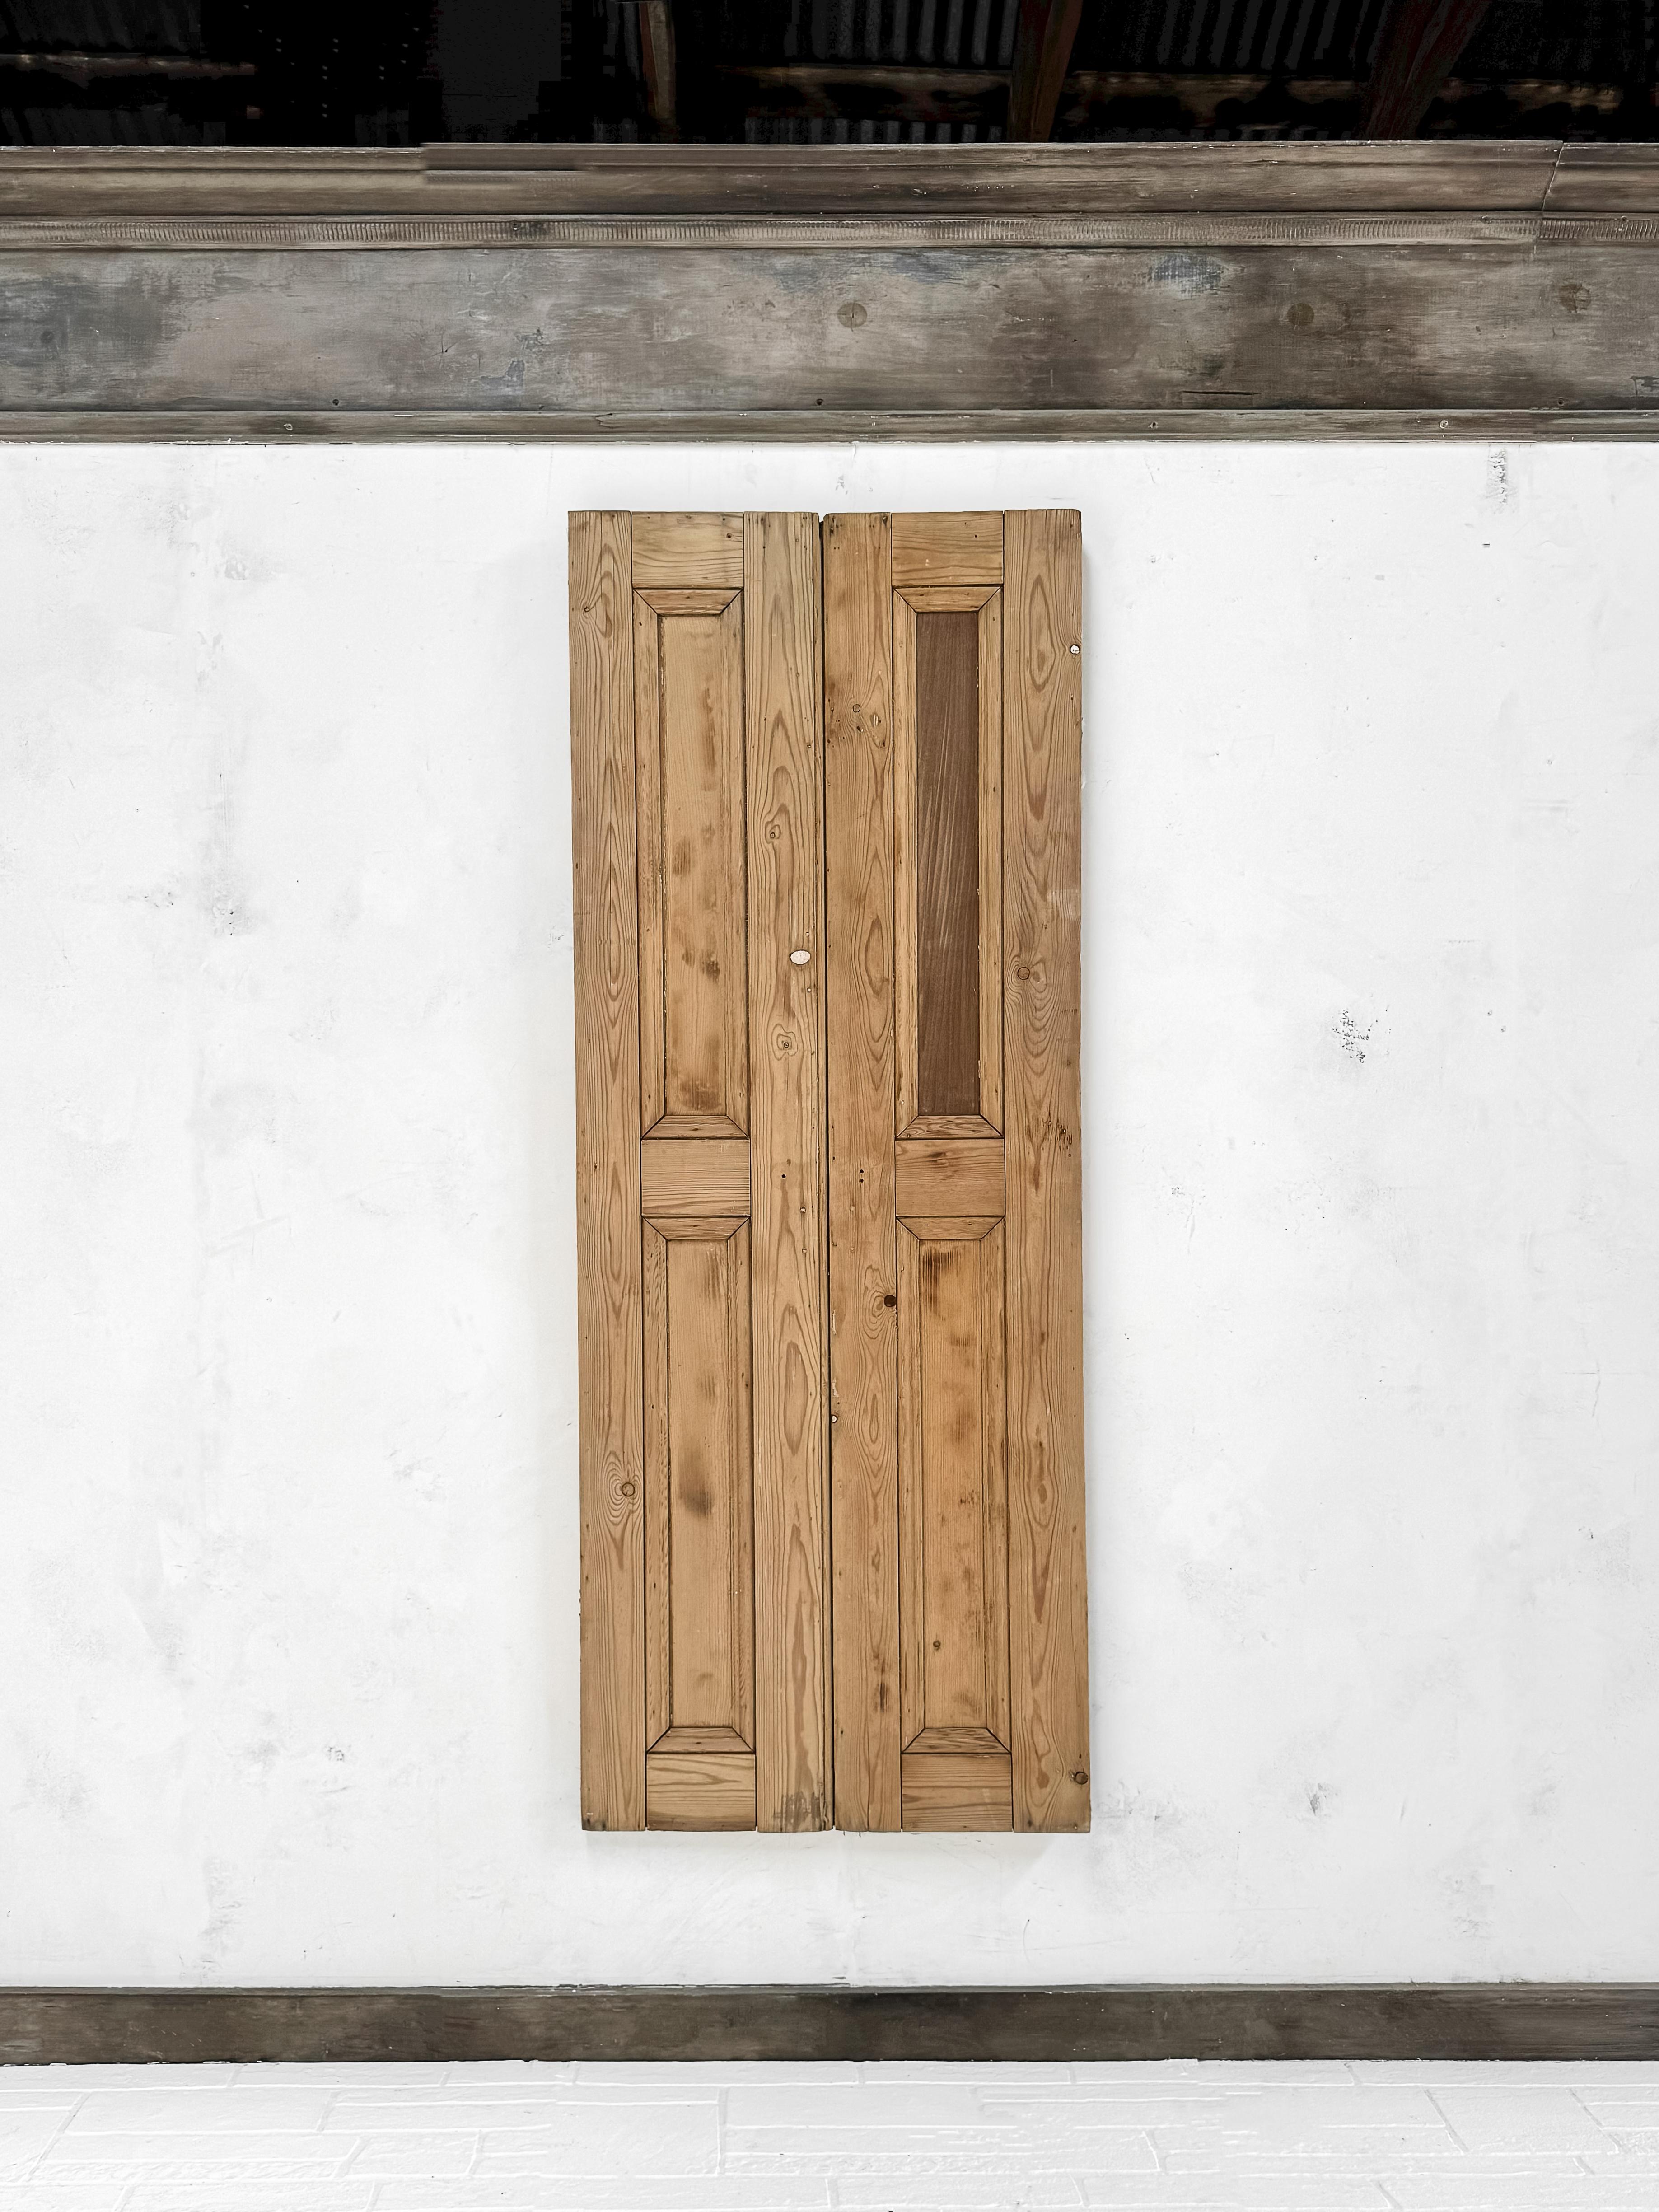 A pair of reclaimed 2-panel cupboard doors having beveled trim details. Enclose a built-in cabinet with this charming pair of doors to add warmth and infuse your home with a touch of history and character.

Salvaged in England, 19th